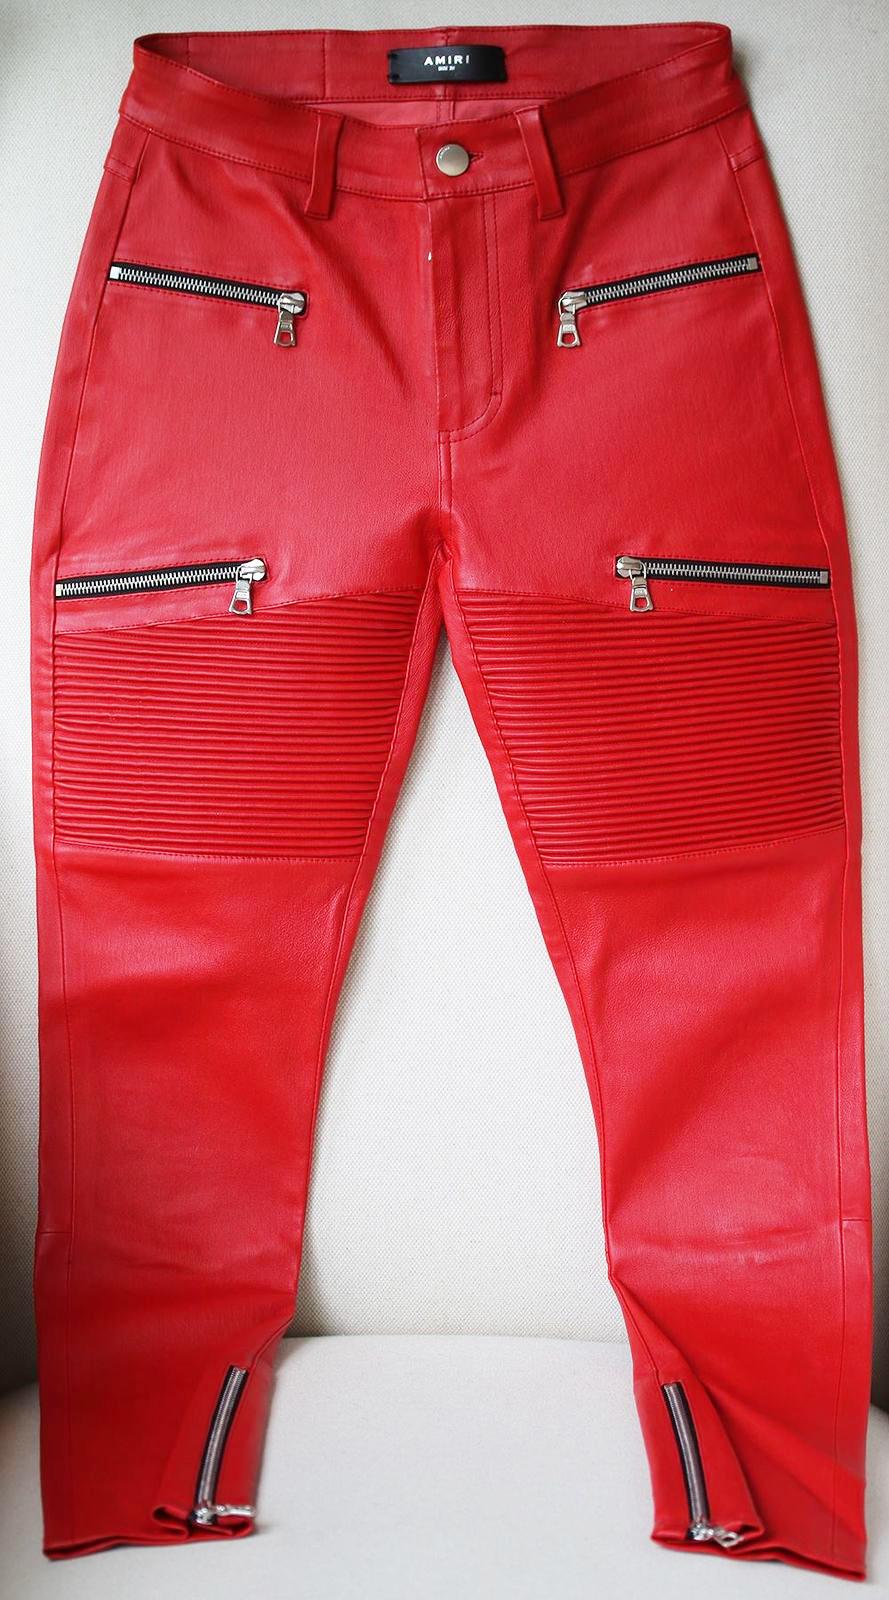 Amiri's Lx1 skinny jeans are crafted of red leather detailed with corrugated panels at the thighs. Sits at waist. Skinny fit. Belt loops. Four zip front pockets. Ankle zips. Leather logo patch and two patch pockets at back. 100% leather. 

Size: W25